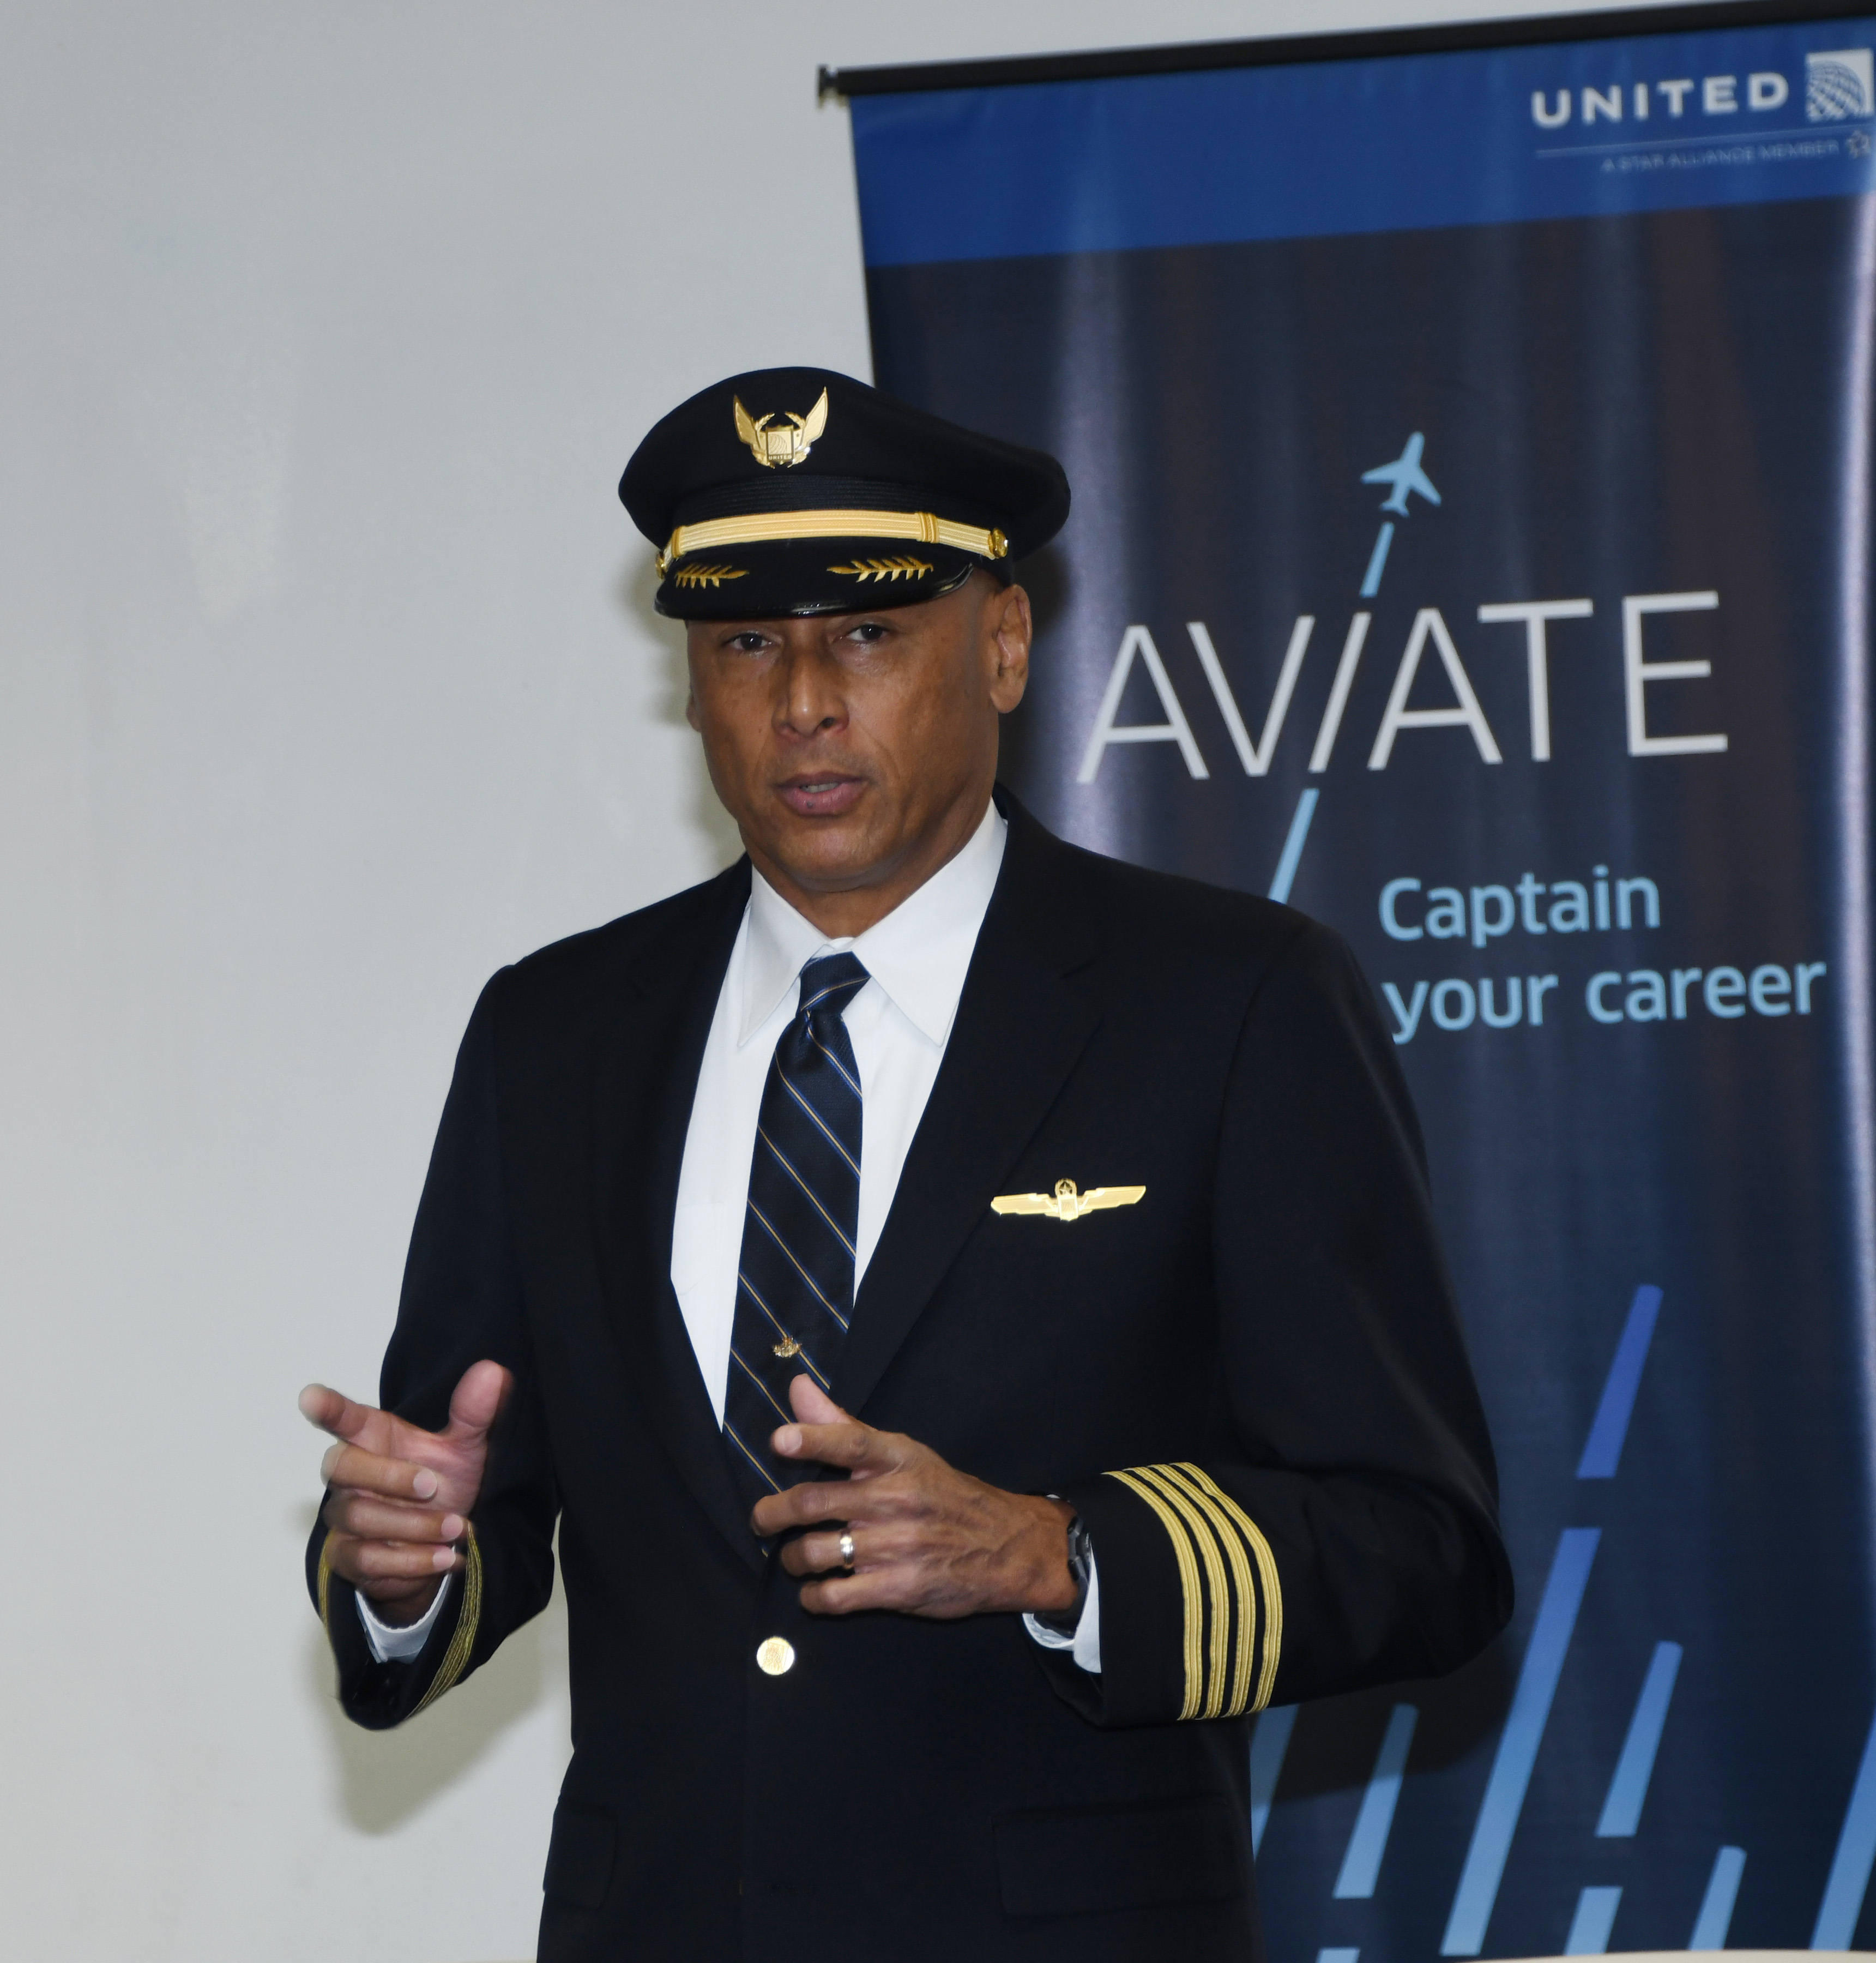 Capt. Mike Bonner, Managing Director of Aviate, talks about the program and United Airlines' partnership with DSU.